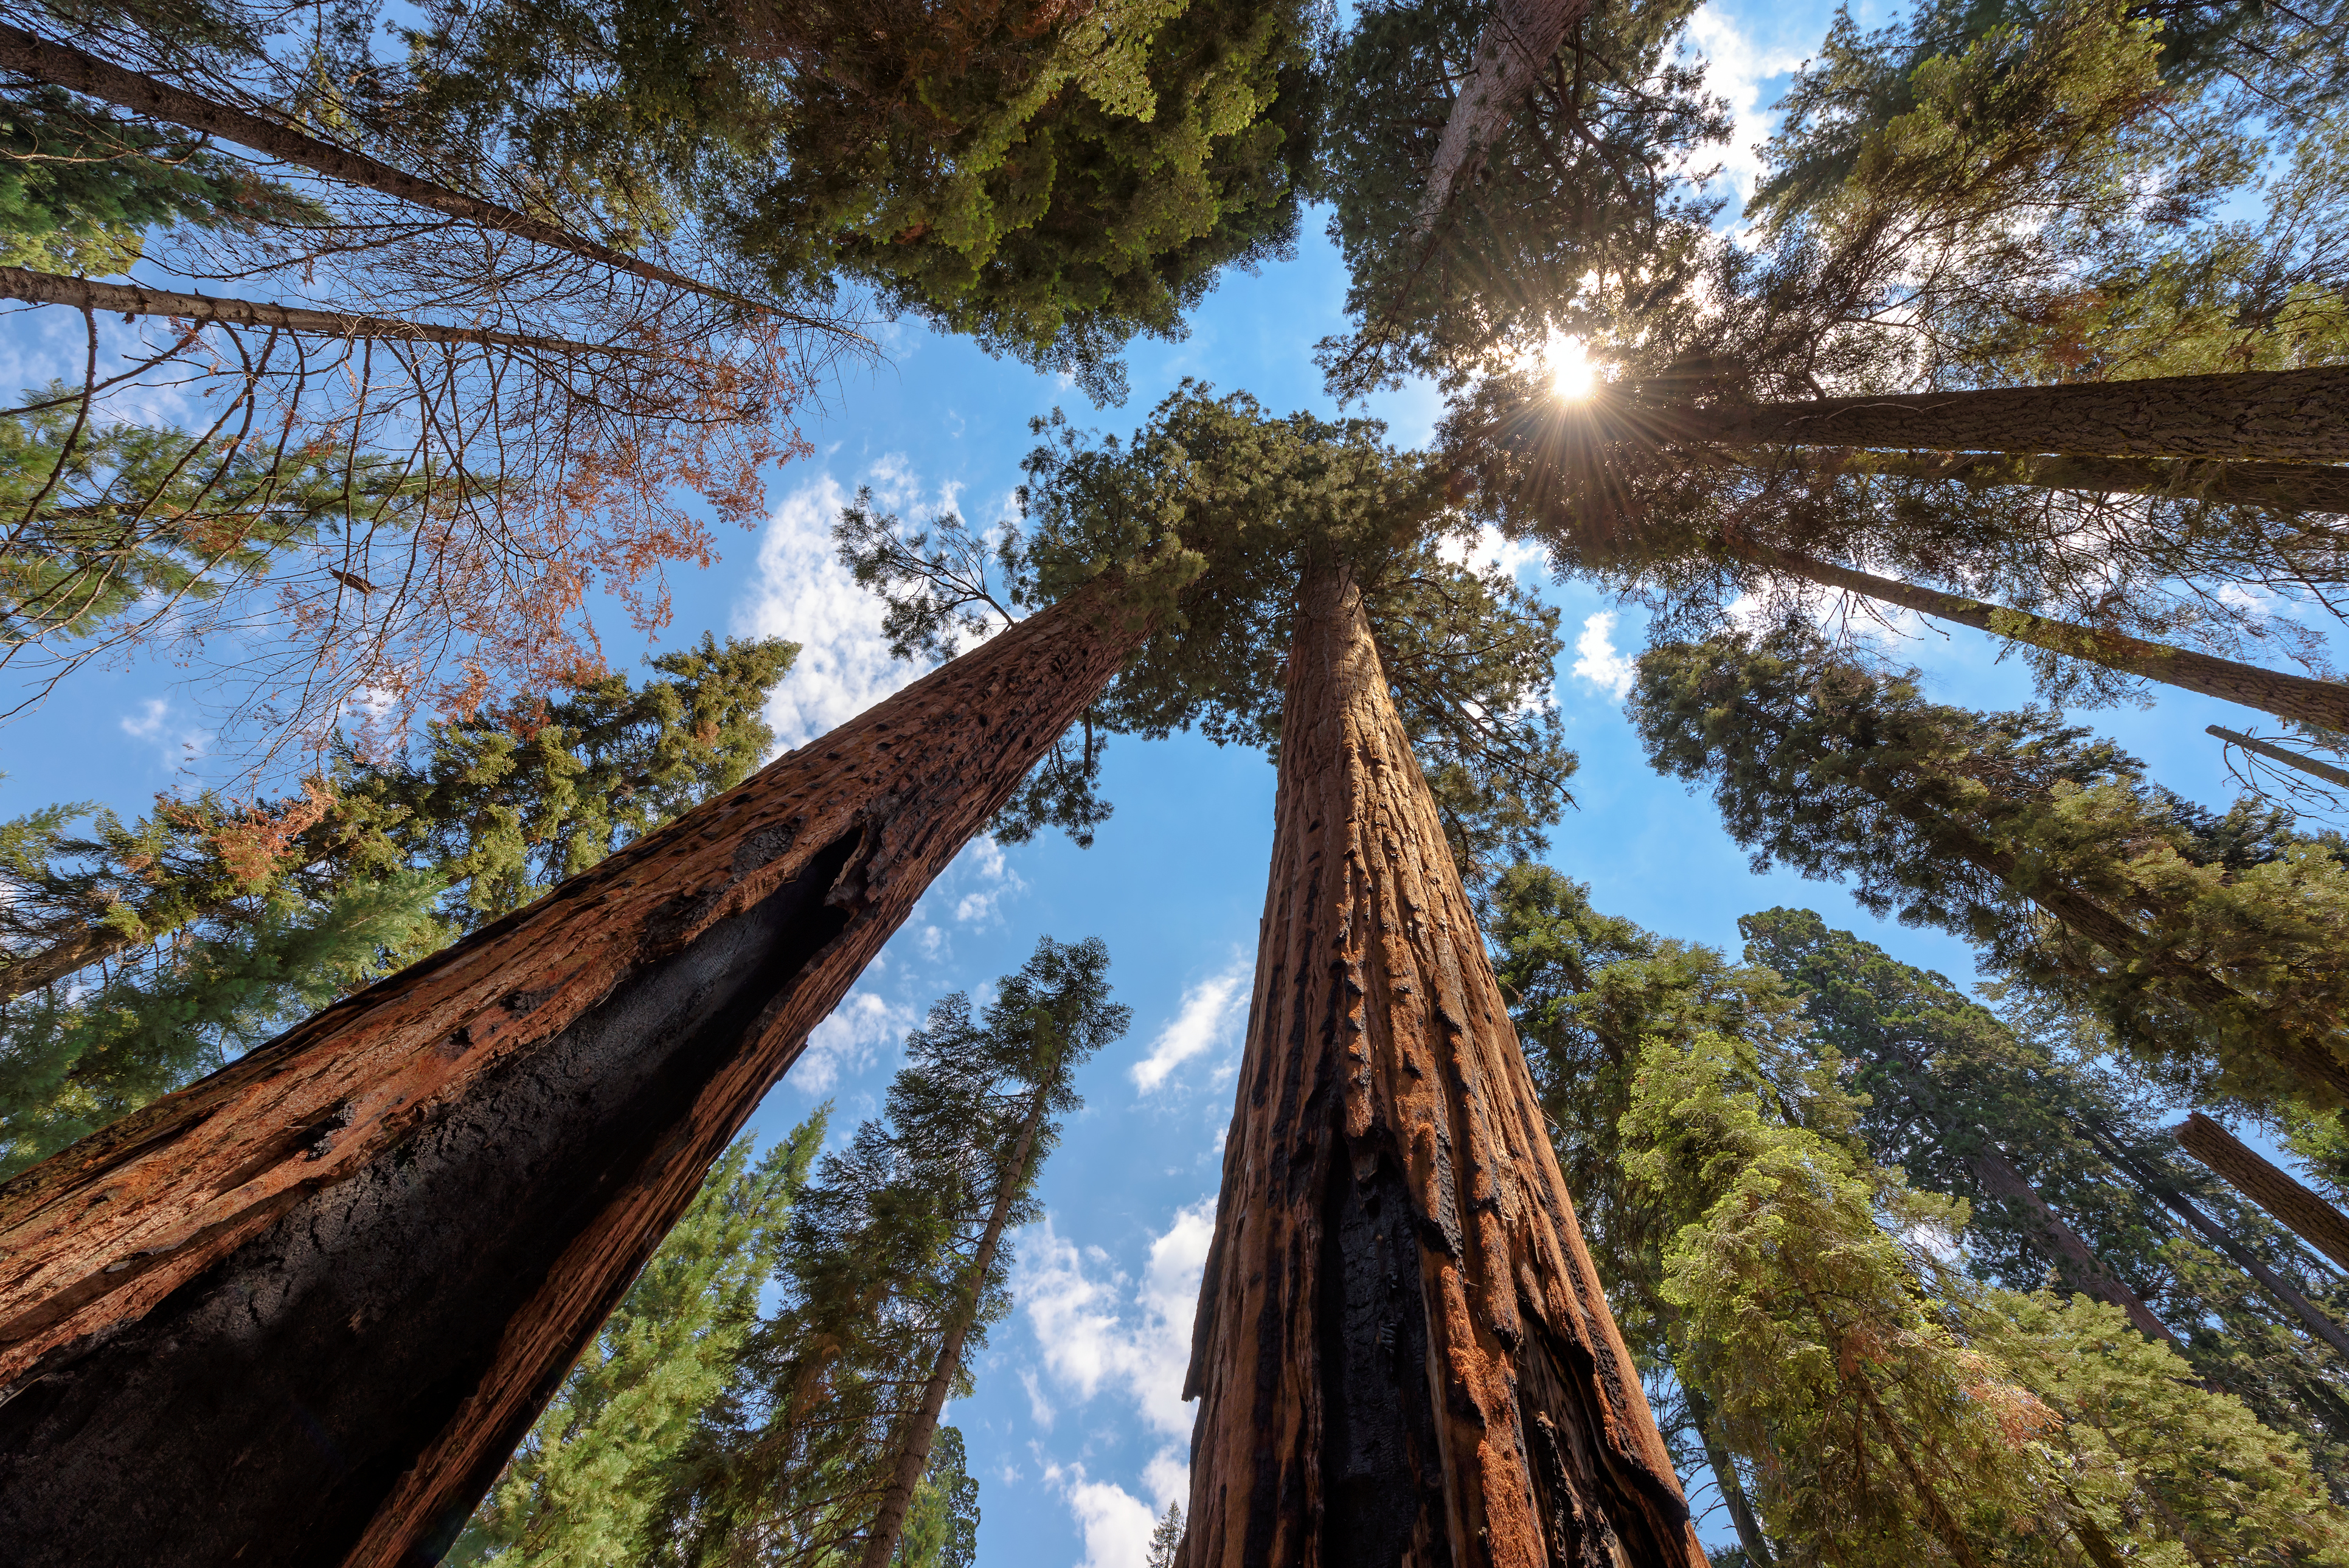 Wide-angle view of famous giant sequoia trees, known as giant redwoods or Sierra redwoods, on a beautiful sunny day with blue sky and clouds in summer, Sequoia National Park, California, USA.